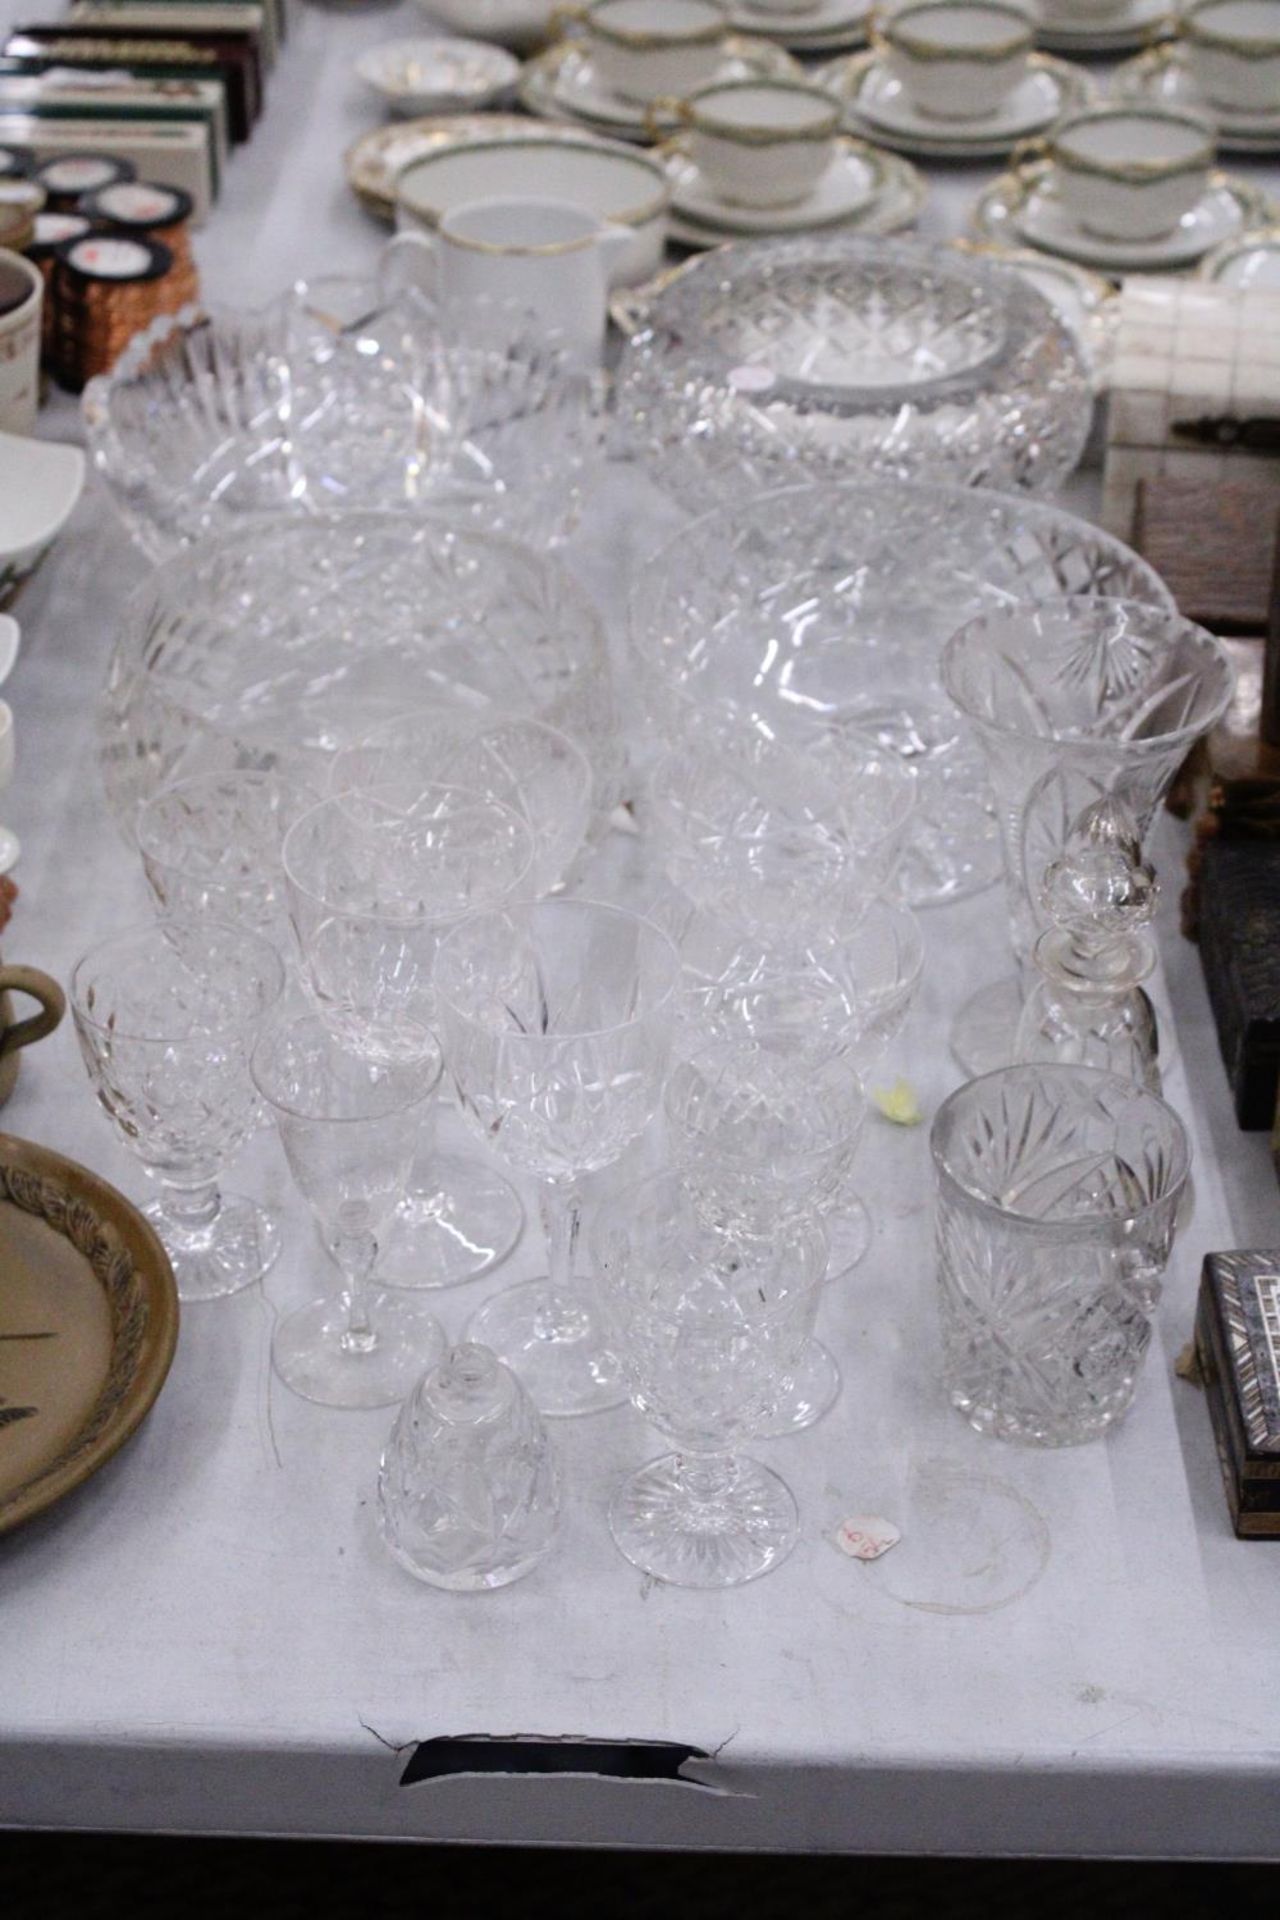 A LARGE QUANTITY OF GLASSWARE TO INCLUDE BOWLS, VASES, WINE GLASSES, ETC